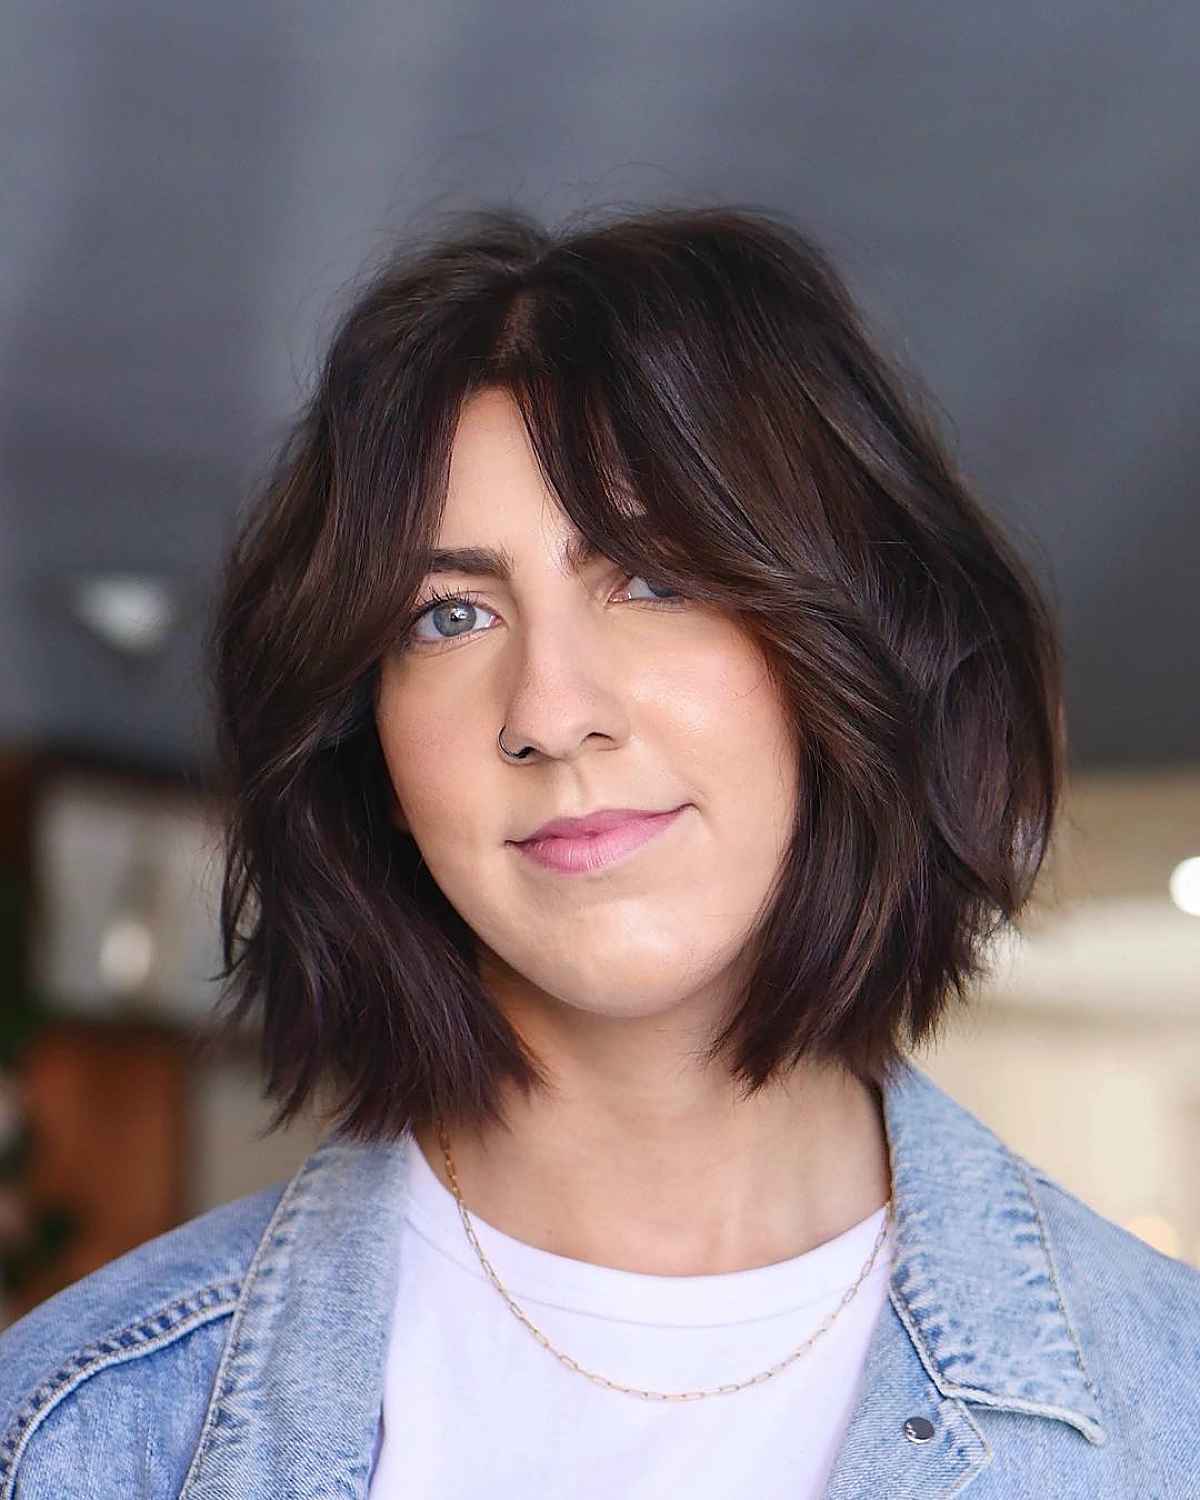 Stylish lob cut with curtain bangs hairstyle